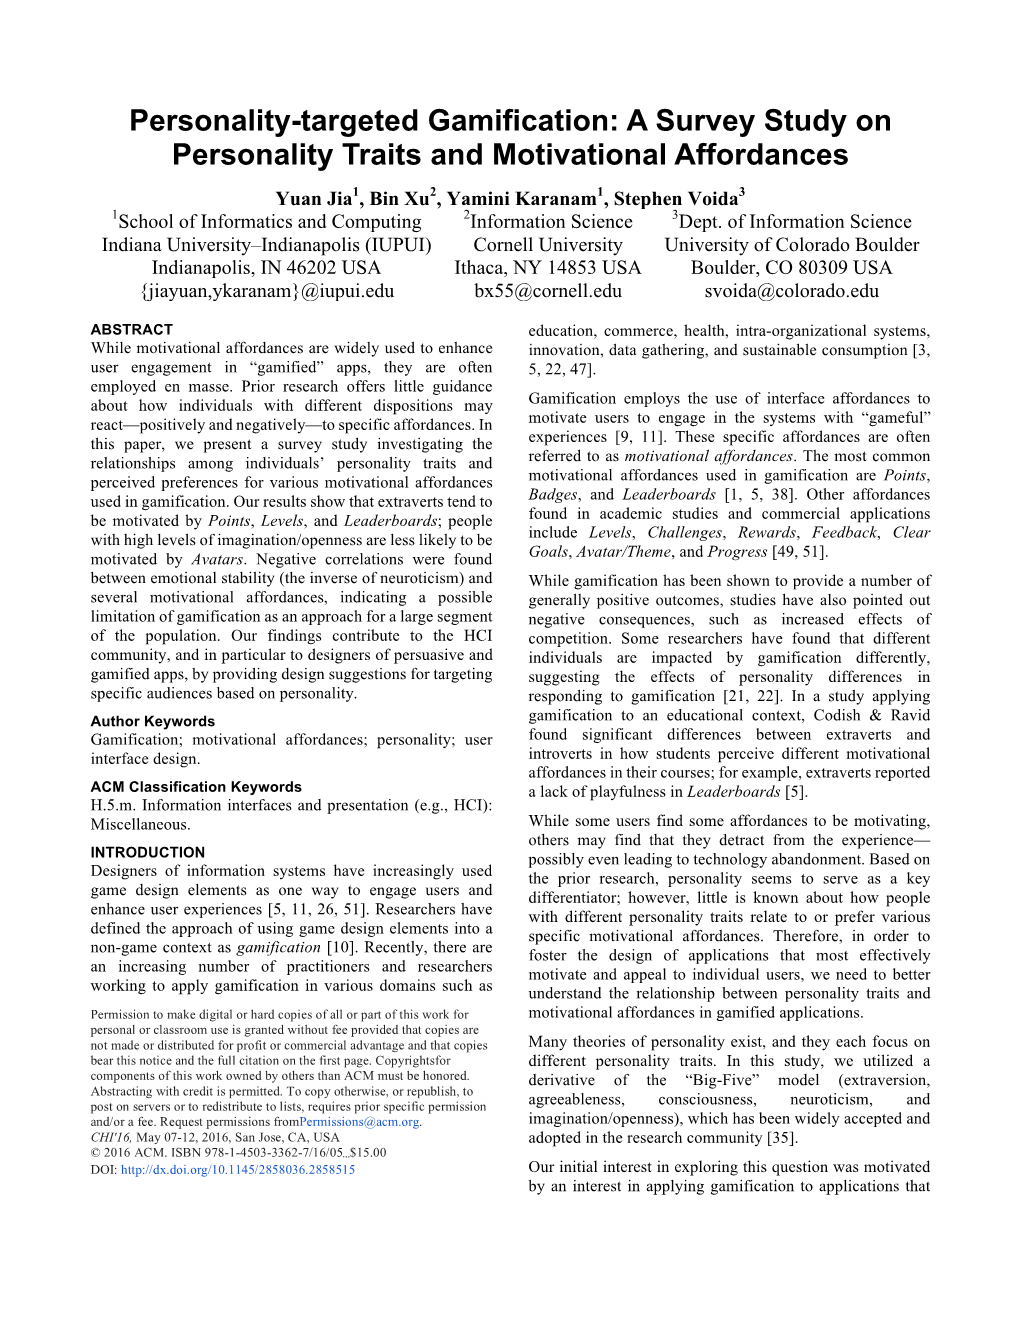 A Survey Study on Personality Traits and Motivational Affordances